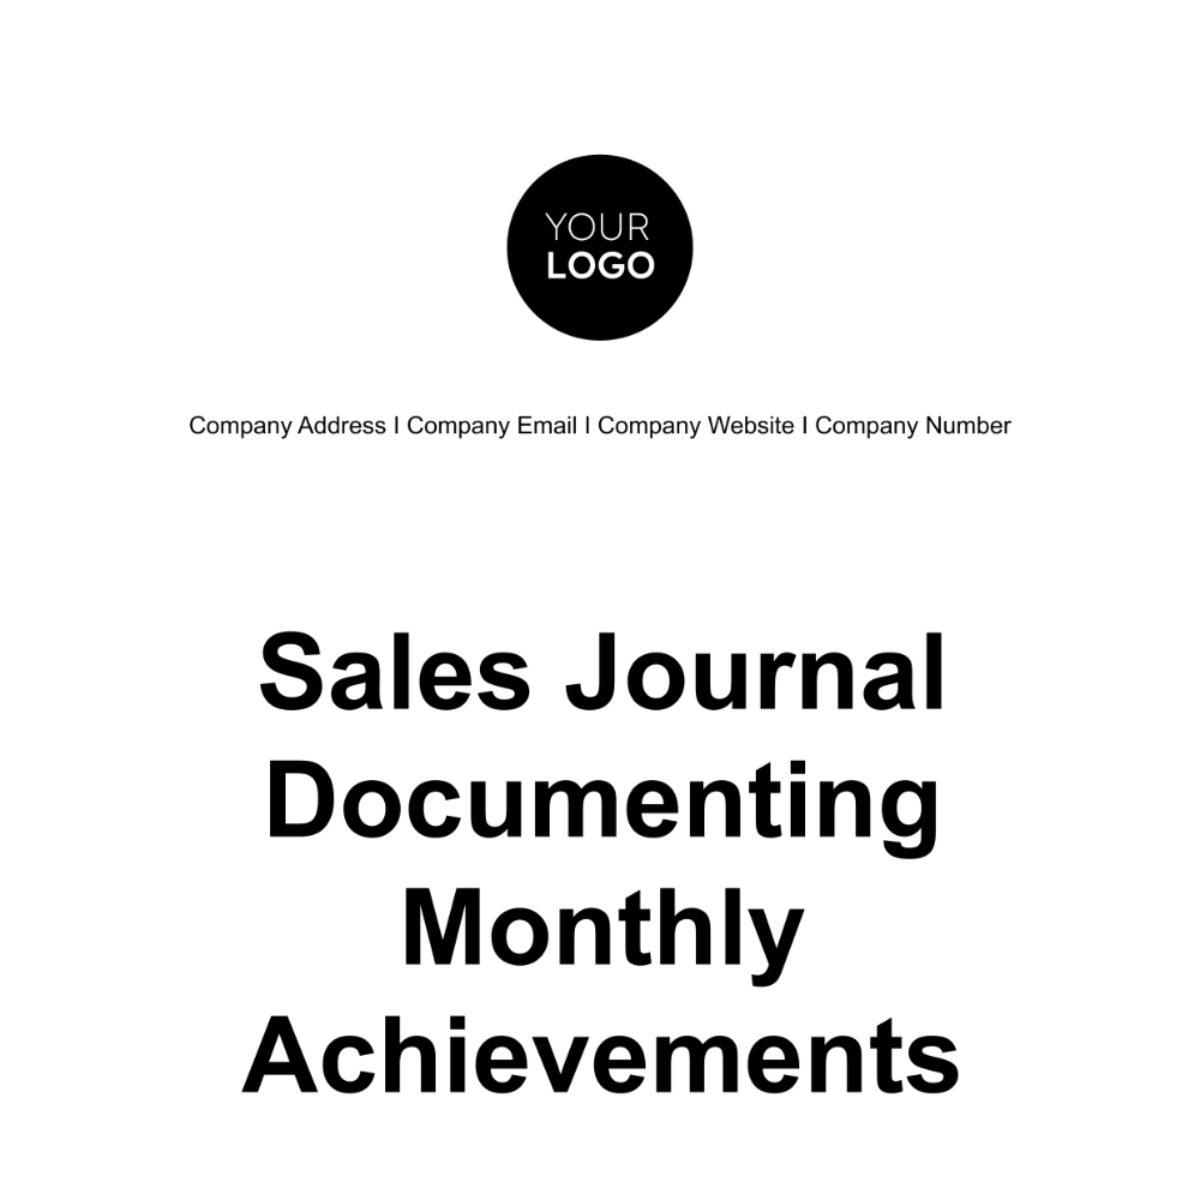 Sales Journal Documenting Monthly Achievements Template